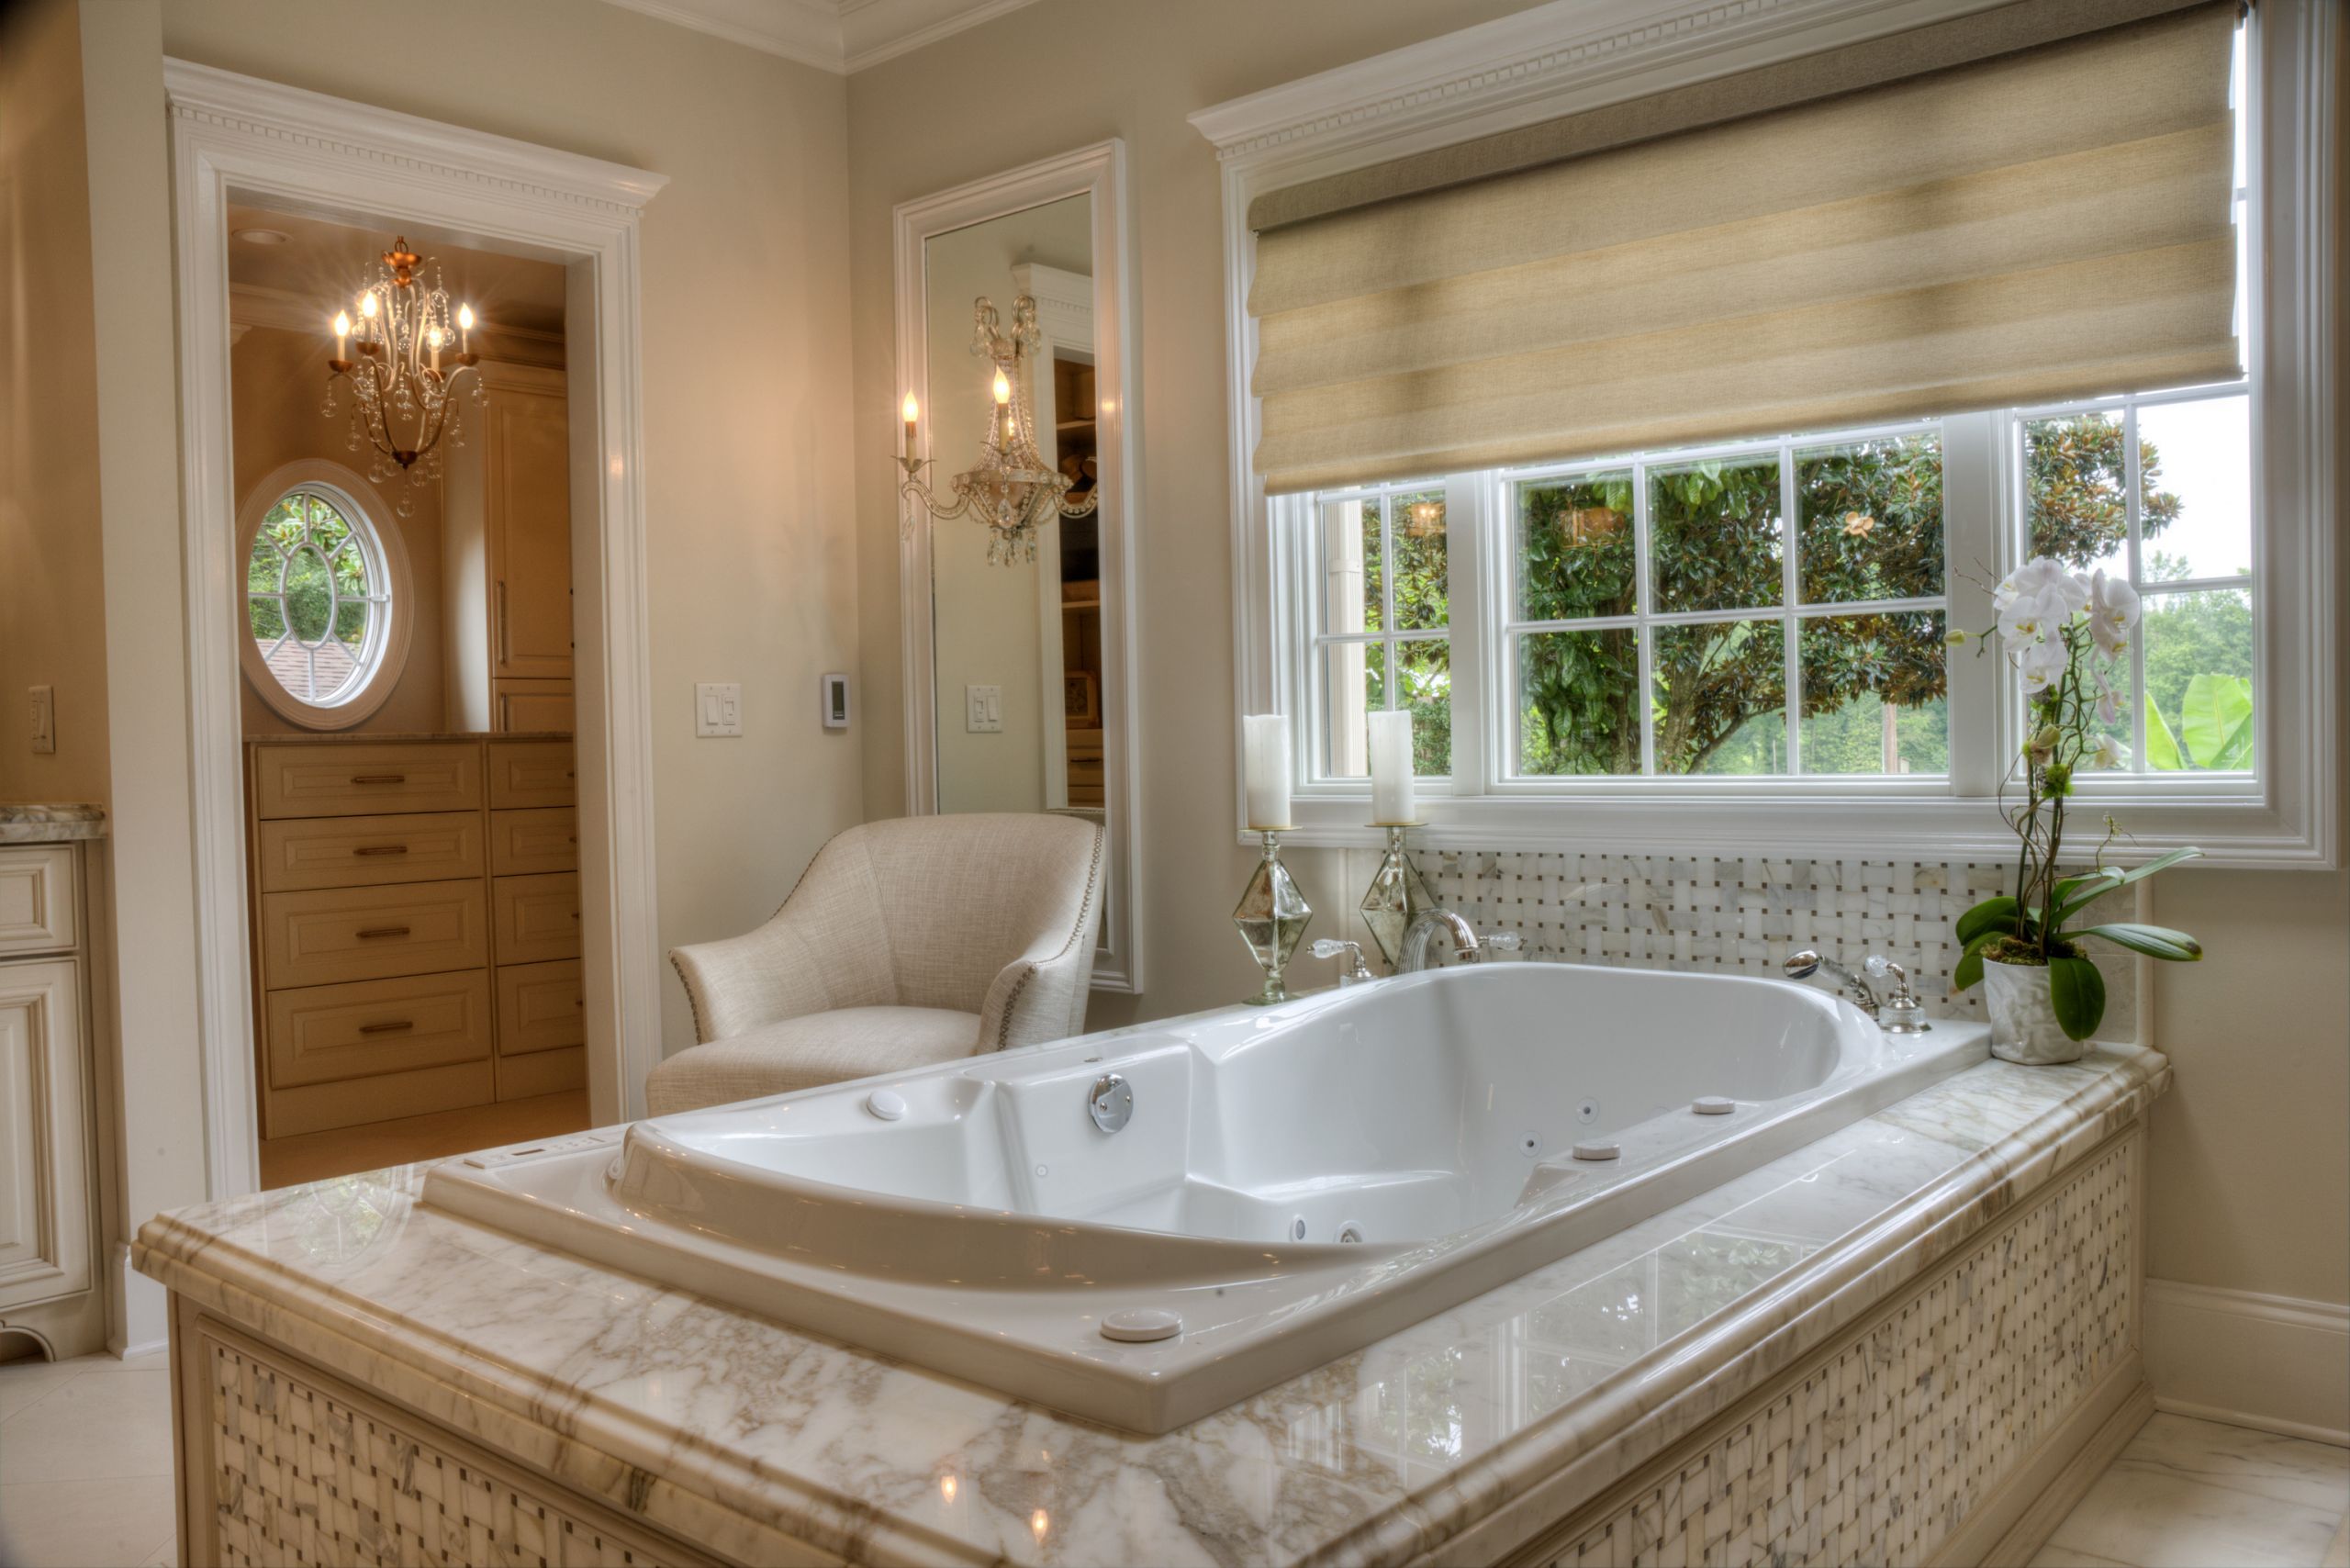 Luxury Master Bathroom
 Master Bathroom Luxury Retreat Haskell s Blog